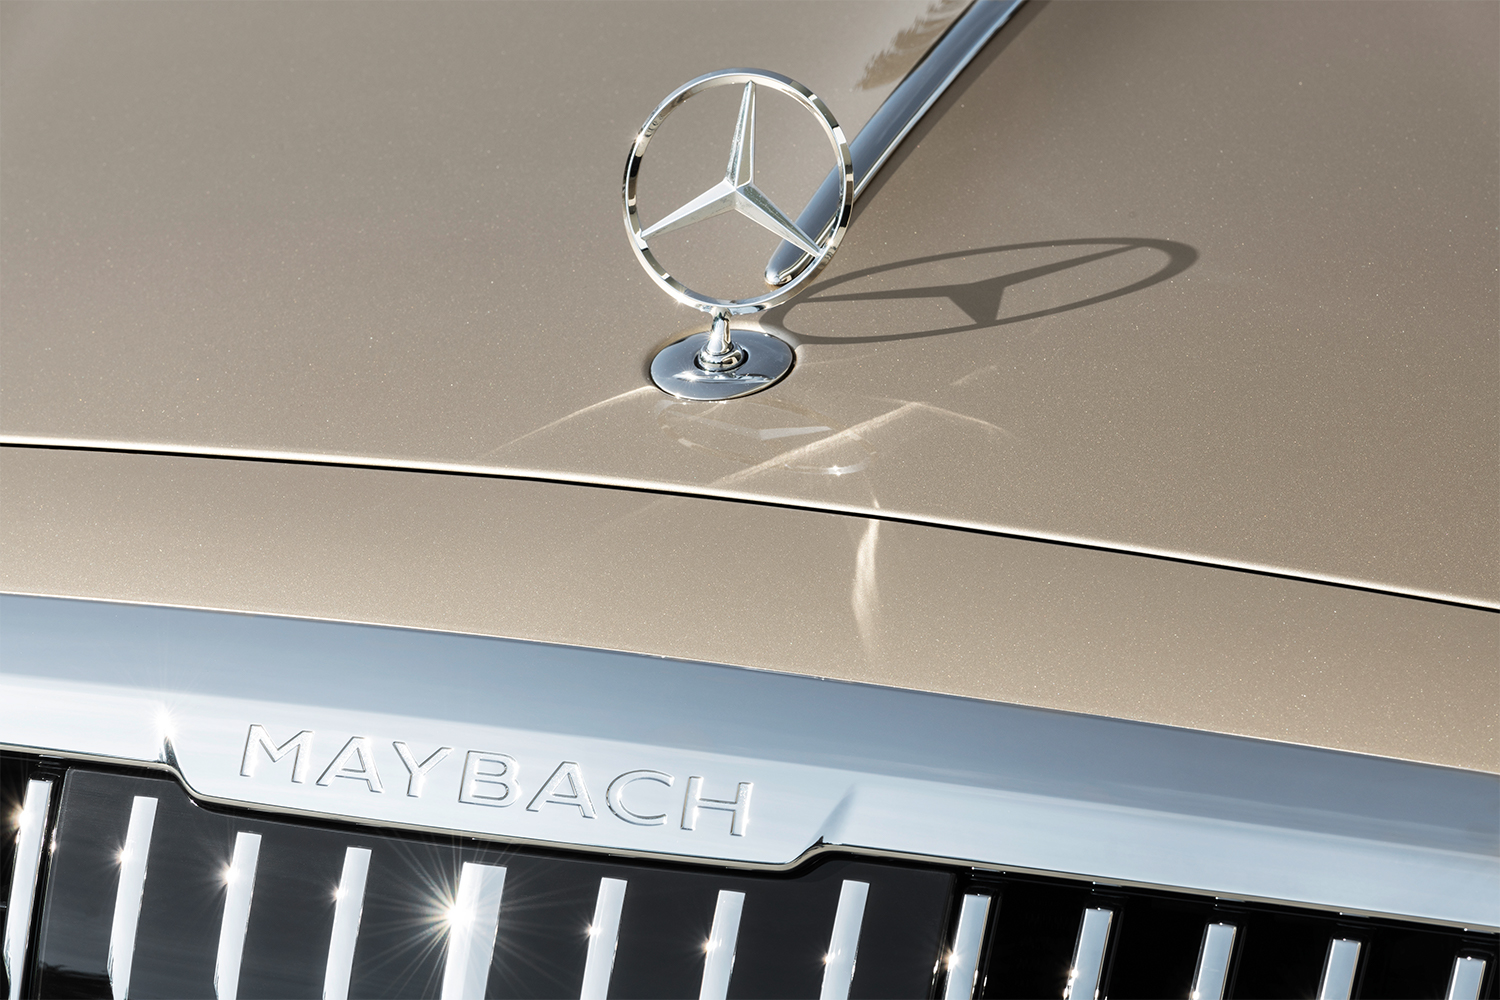 The Maybach name and Mercedes-Benz logo on the new Mercedes-Maybach S-Class